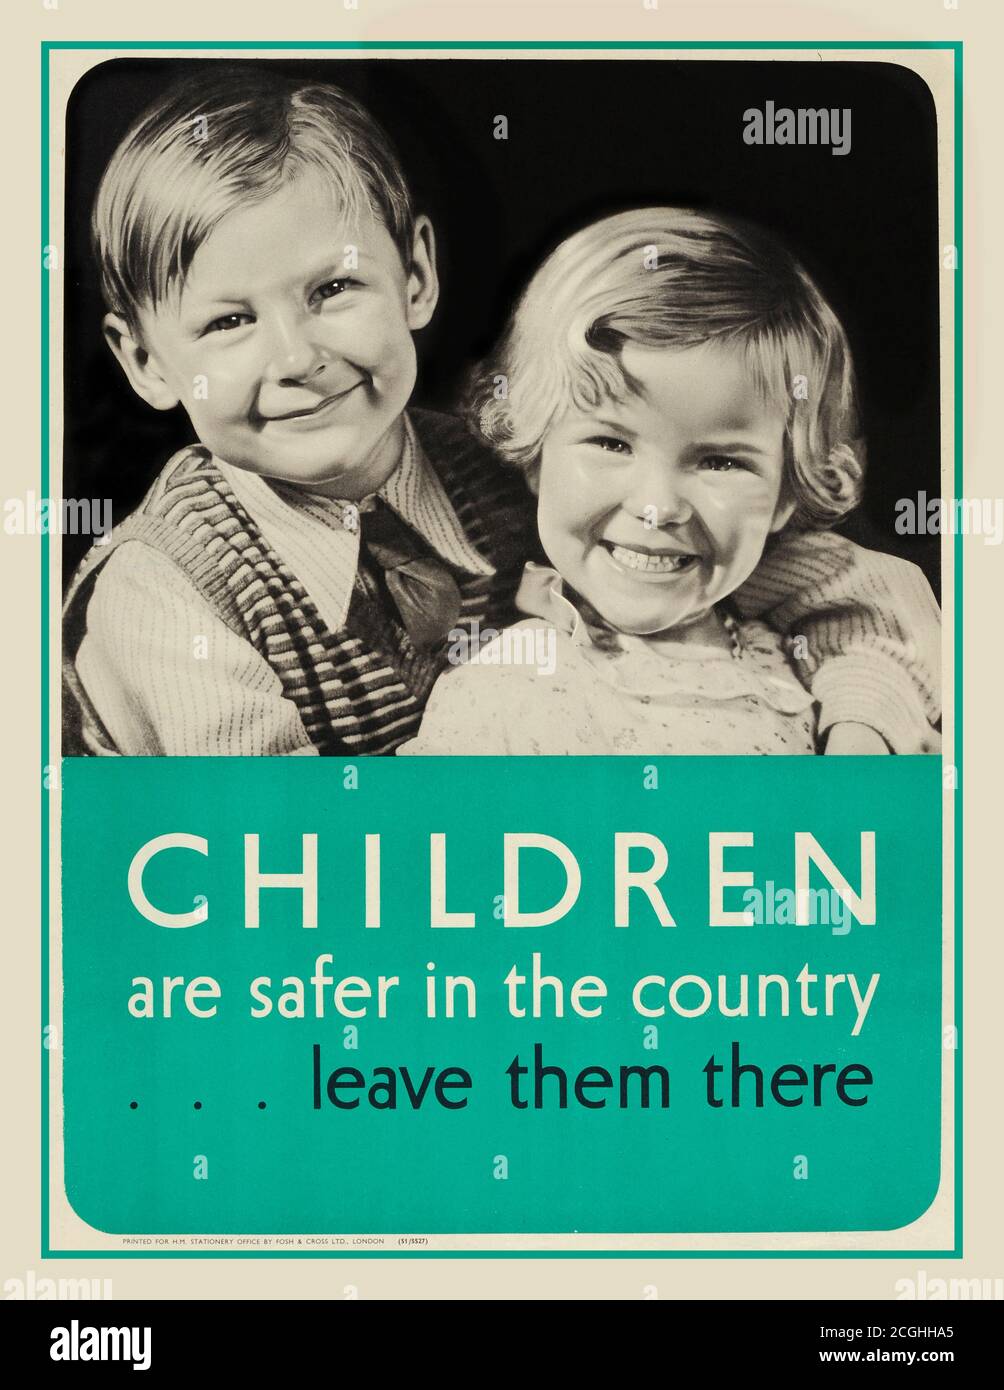 WW2 Child Evacuees Poster Vintage World War Two propaganda poster 'Children are safer in the country ... leave them there' featuring a black and white image of two young and healthy smiling children, the boy with his arm around a girl showing the older brother protecting his younger sister. The evacuation during WWII known as Operation Pied Piper started in 1939, organised by the Ministry of Health to protect people from the bombing in cities by moving over 3.5 million evacuees to the safety of the countryside and other countries in the British Empire 1940s, WW2 World War II Stock Photo